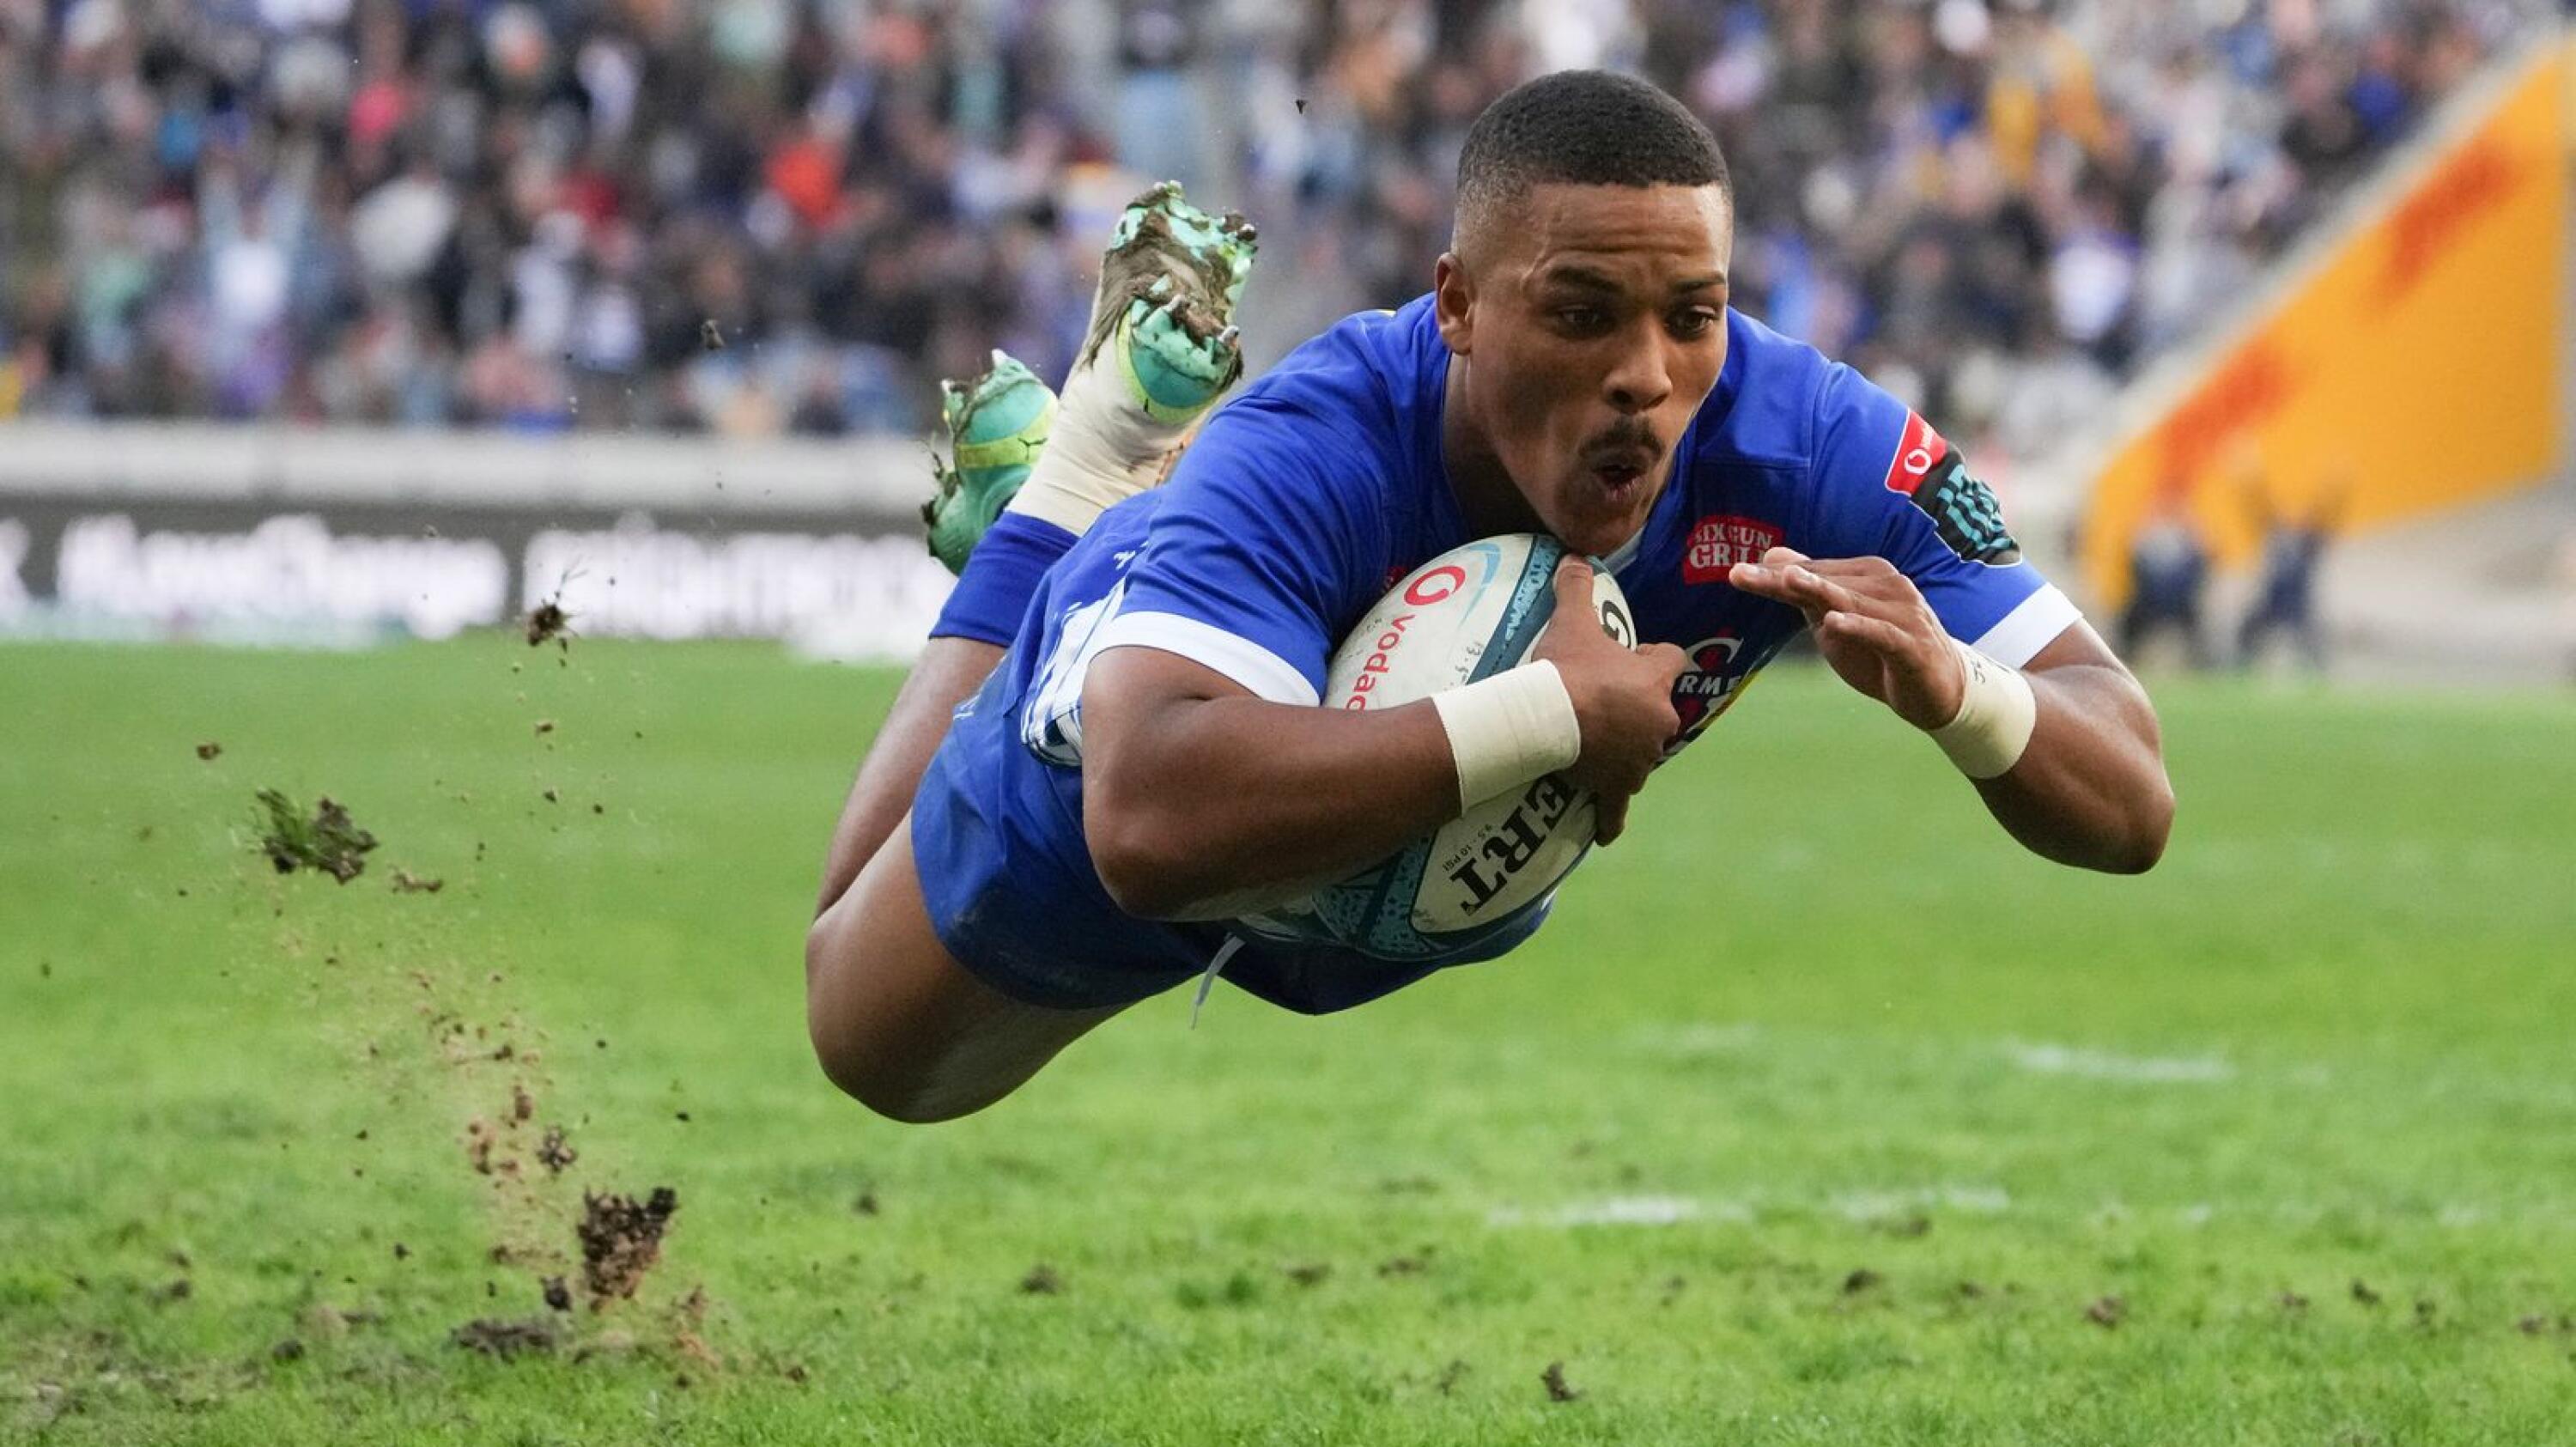 Stormers’ Angelo Davids scores a try during their United Rugby Championship semi-final against Connacht at Cape Town Stadium in Cape Town